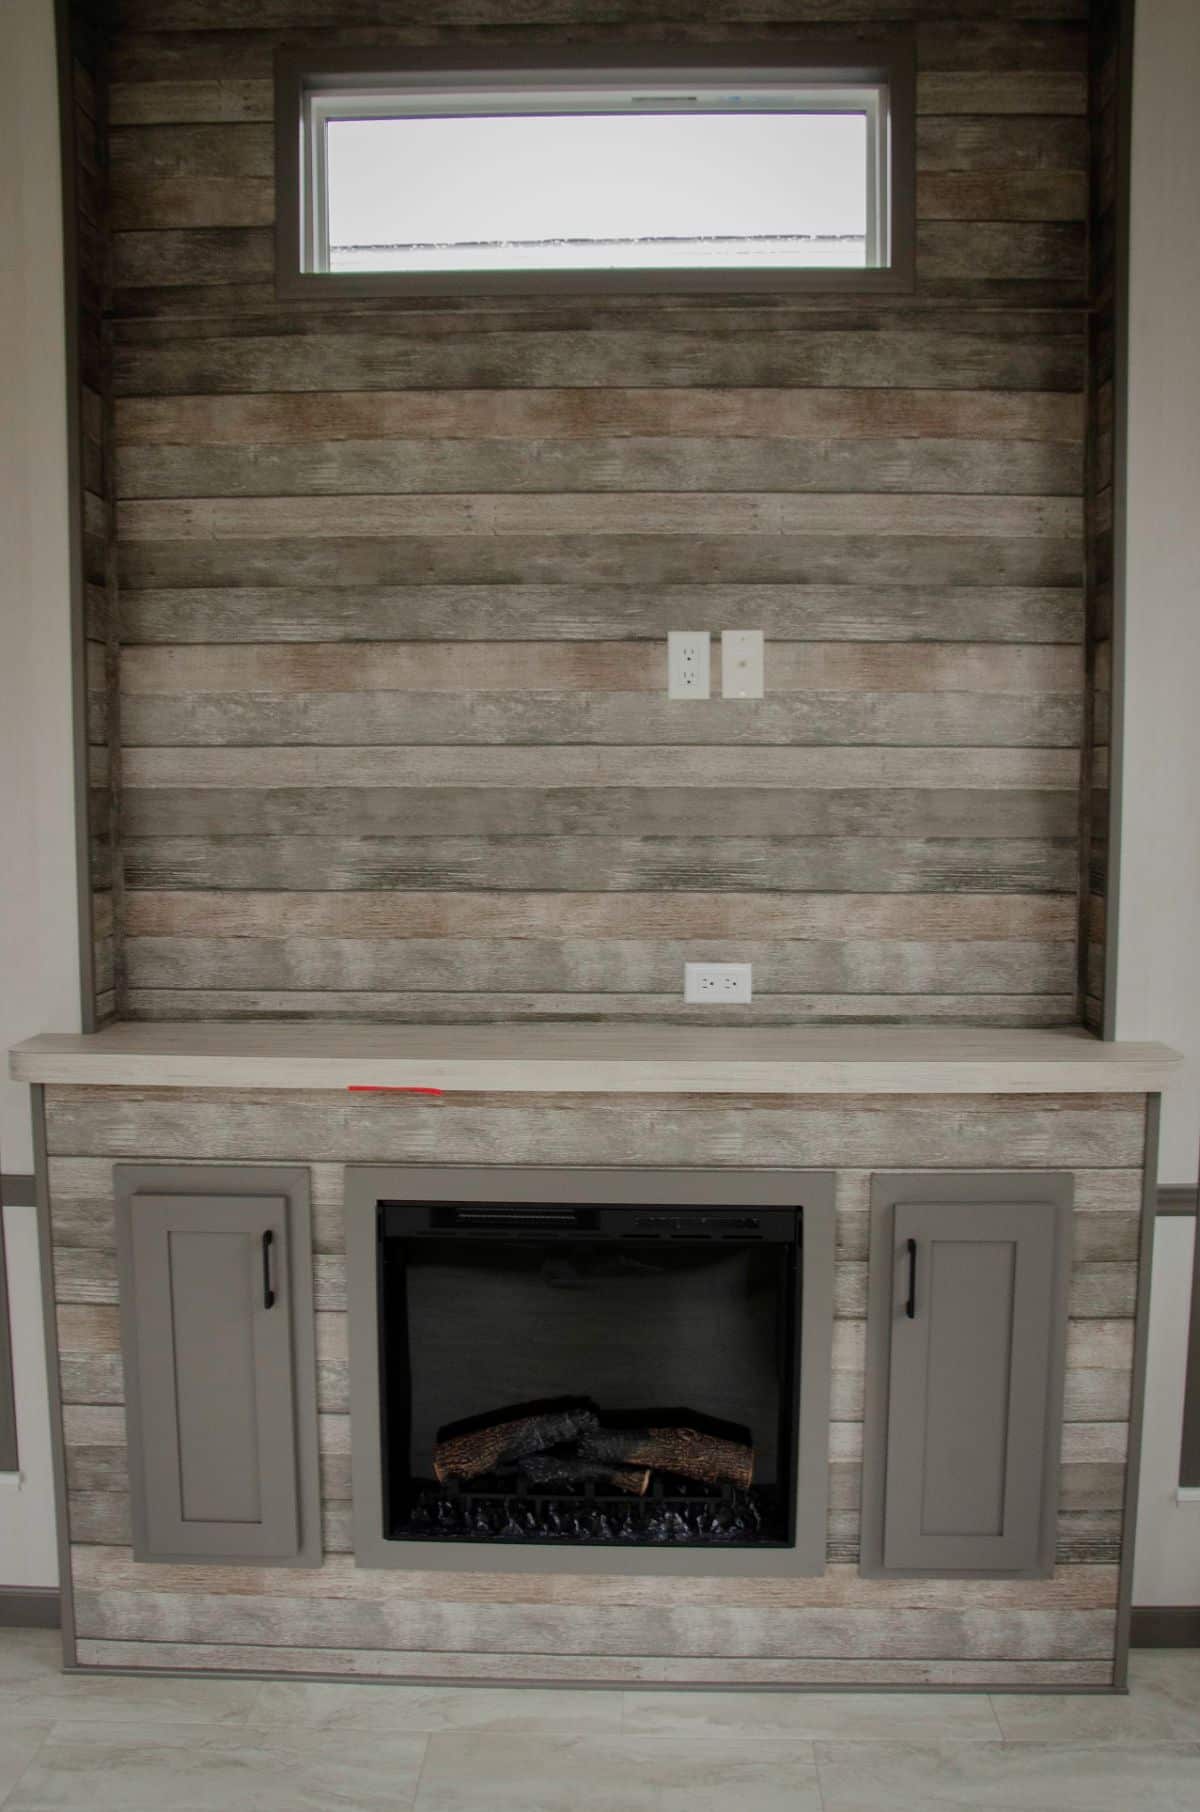 A modern-looking fireplace in a tiny house.